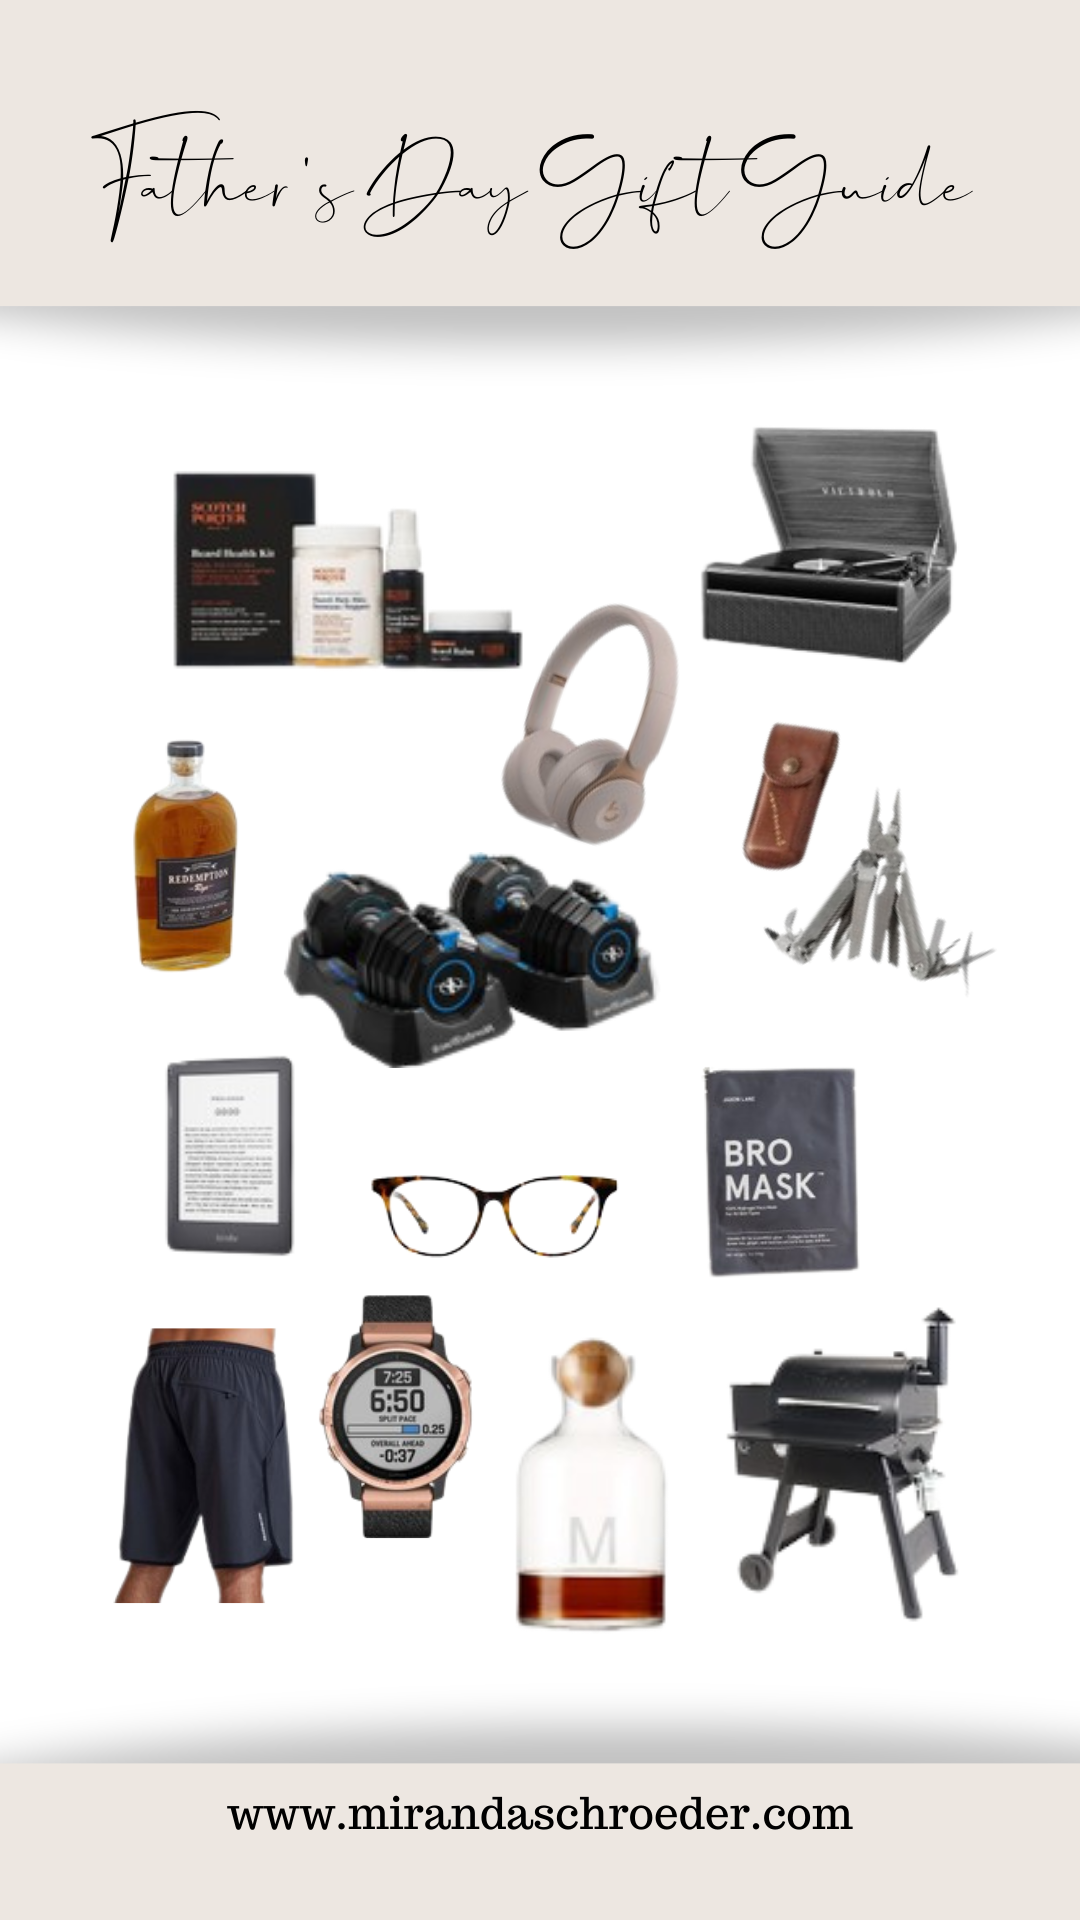 Unique Father's Day Gift Ideas 2021 | Father's Day Gifts for Every Kind of Dad | Miranda Schroeder Blog

www.mirandaschroeder.com